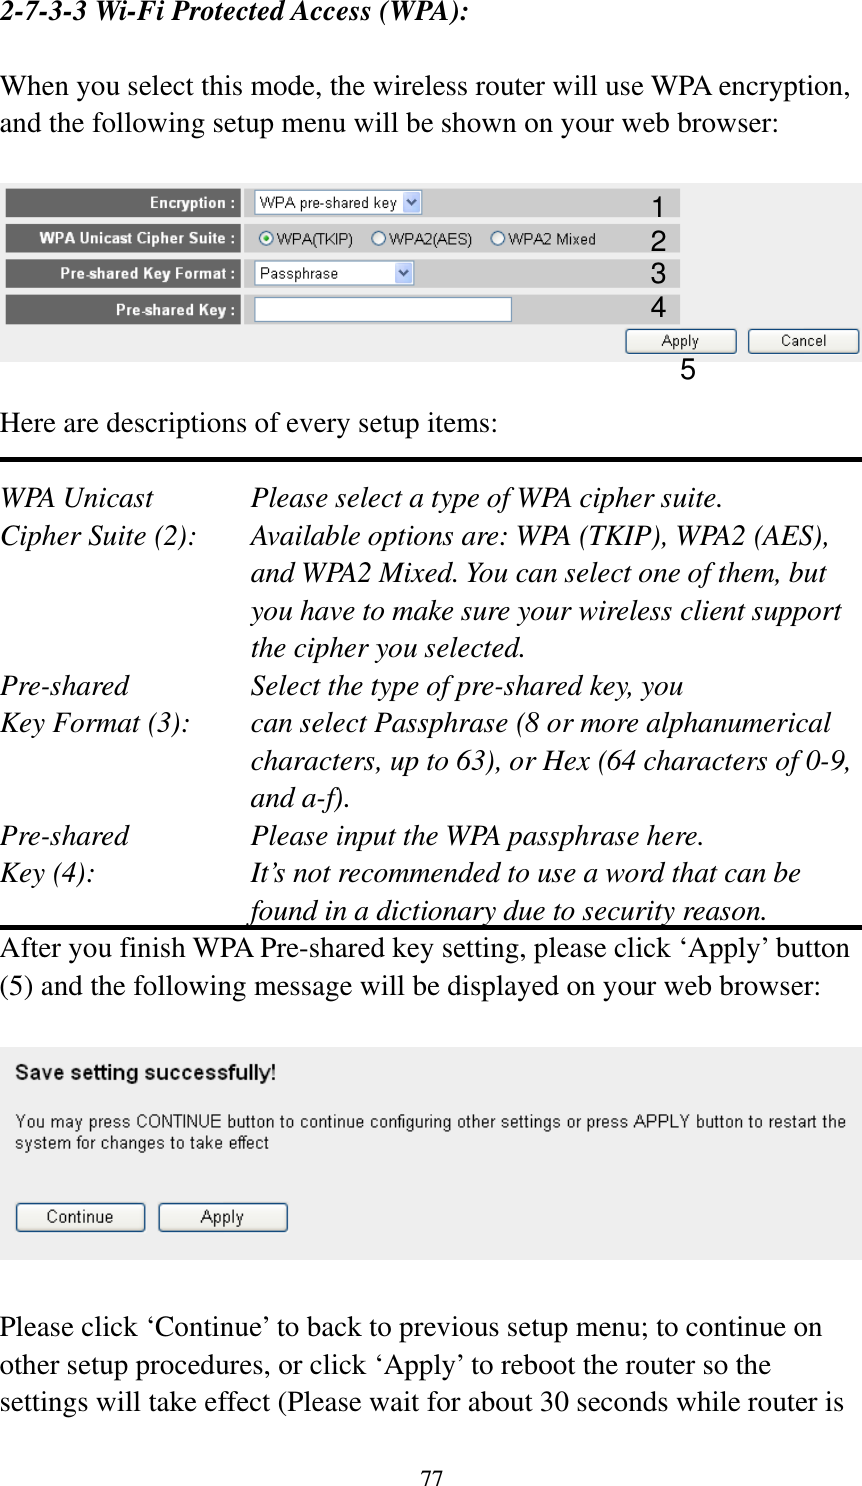 77 2-7-3-3 Wi-Fi Protected Access (WPA):  When you select this mode, the wireless router will use WPA encryption, and the following setup menu will be shown on your web browser:    Here are descriptions of every setup items:  WPA Unicast      Please select a type of WPA cipher suite. Cipher Suite (2):  Available options are: WPA (TKIP), WPA2 (AES), and WPA2 Mixed. You can select one of them, but you have to make sure your wireless client support the cipher you selected. Pre-shared       Select the type of pre-shared key, you Key Format (3):    can select Passphrase (8 or more alphanumerical characters, up to 63), or Hex (64 characters of 0-9, and a-f). Pre-shared       Please input the WPA passphrase here. Key (4):    It’s not recommended to use a word that can be found in a dictionary due to security reason. After you finish WPA Pre-shared key setting, please click ‘Apply’ button (5) and the following message will be displayed on your web browser:    Please click ‘Continue’ to back to previous setup menu; to continue on other setup procedures, or click ‘Apply’ to reboot the router so the settings will take effect (Please wait for about 30 seconds while router is 12 3 5 4 